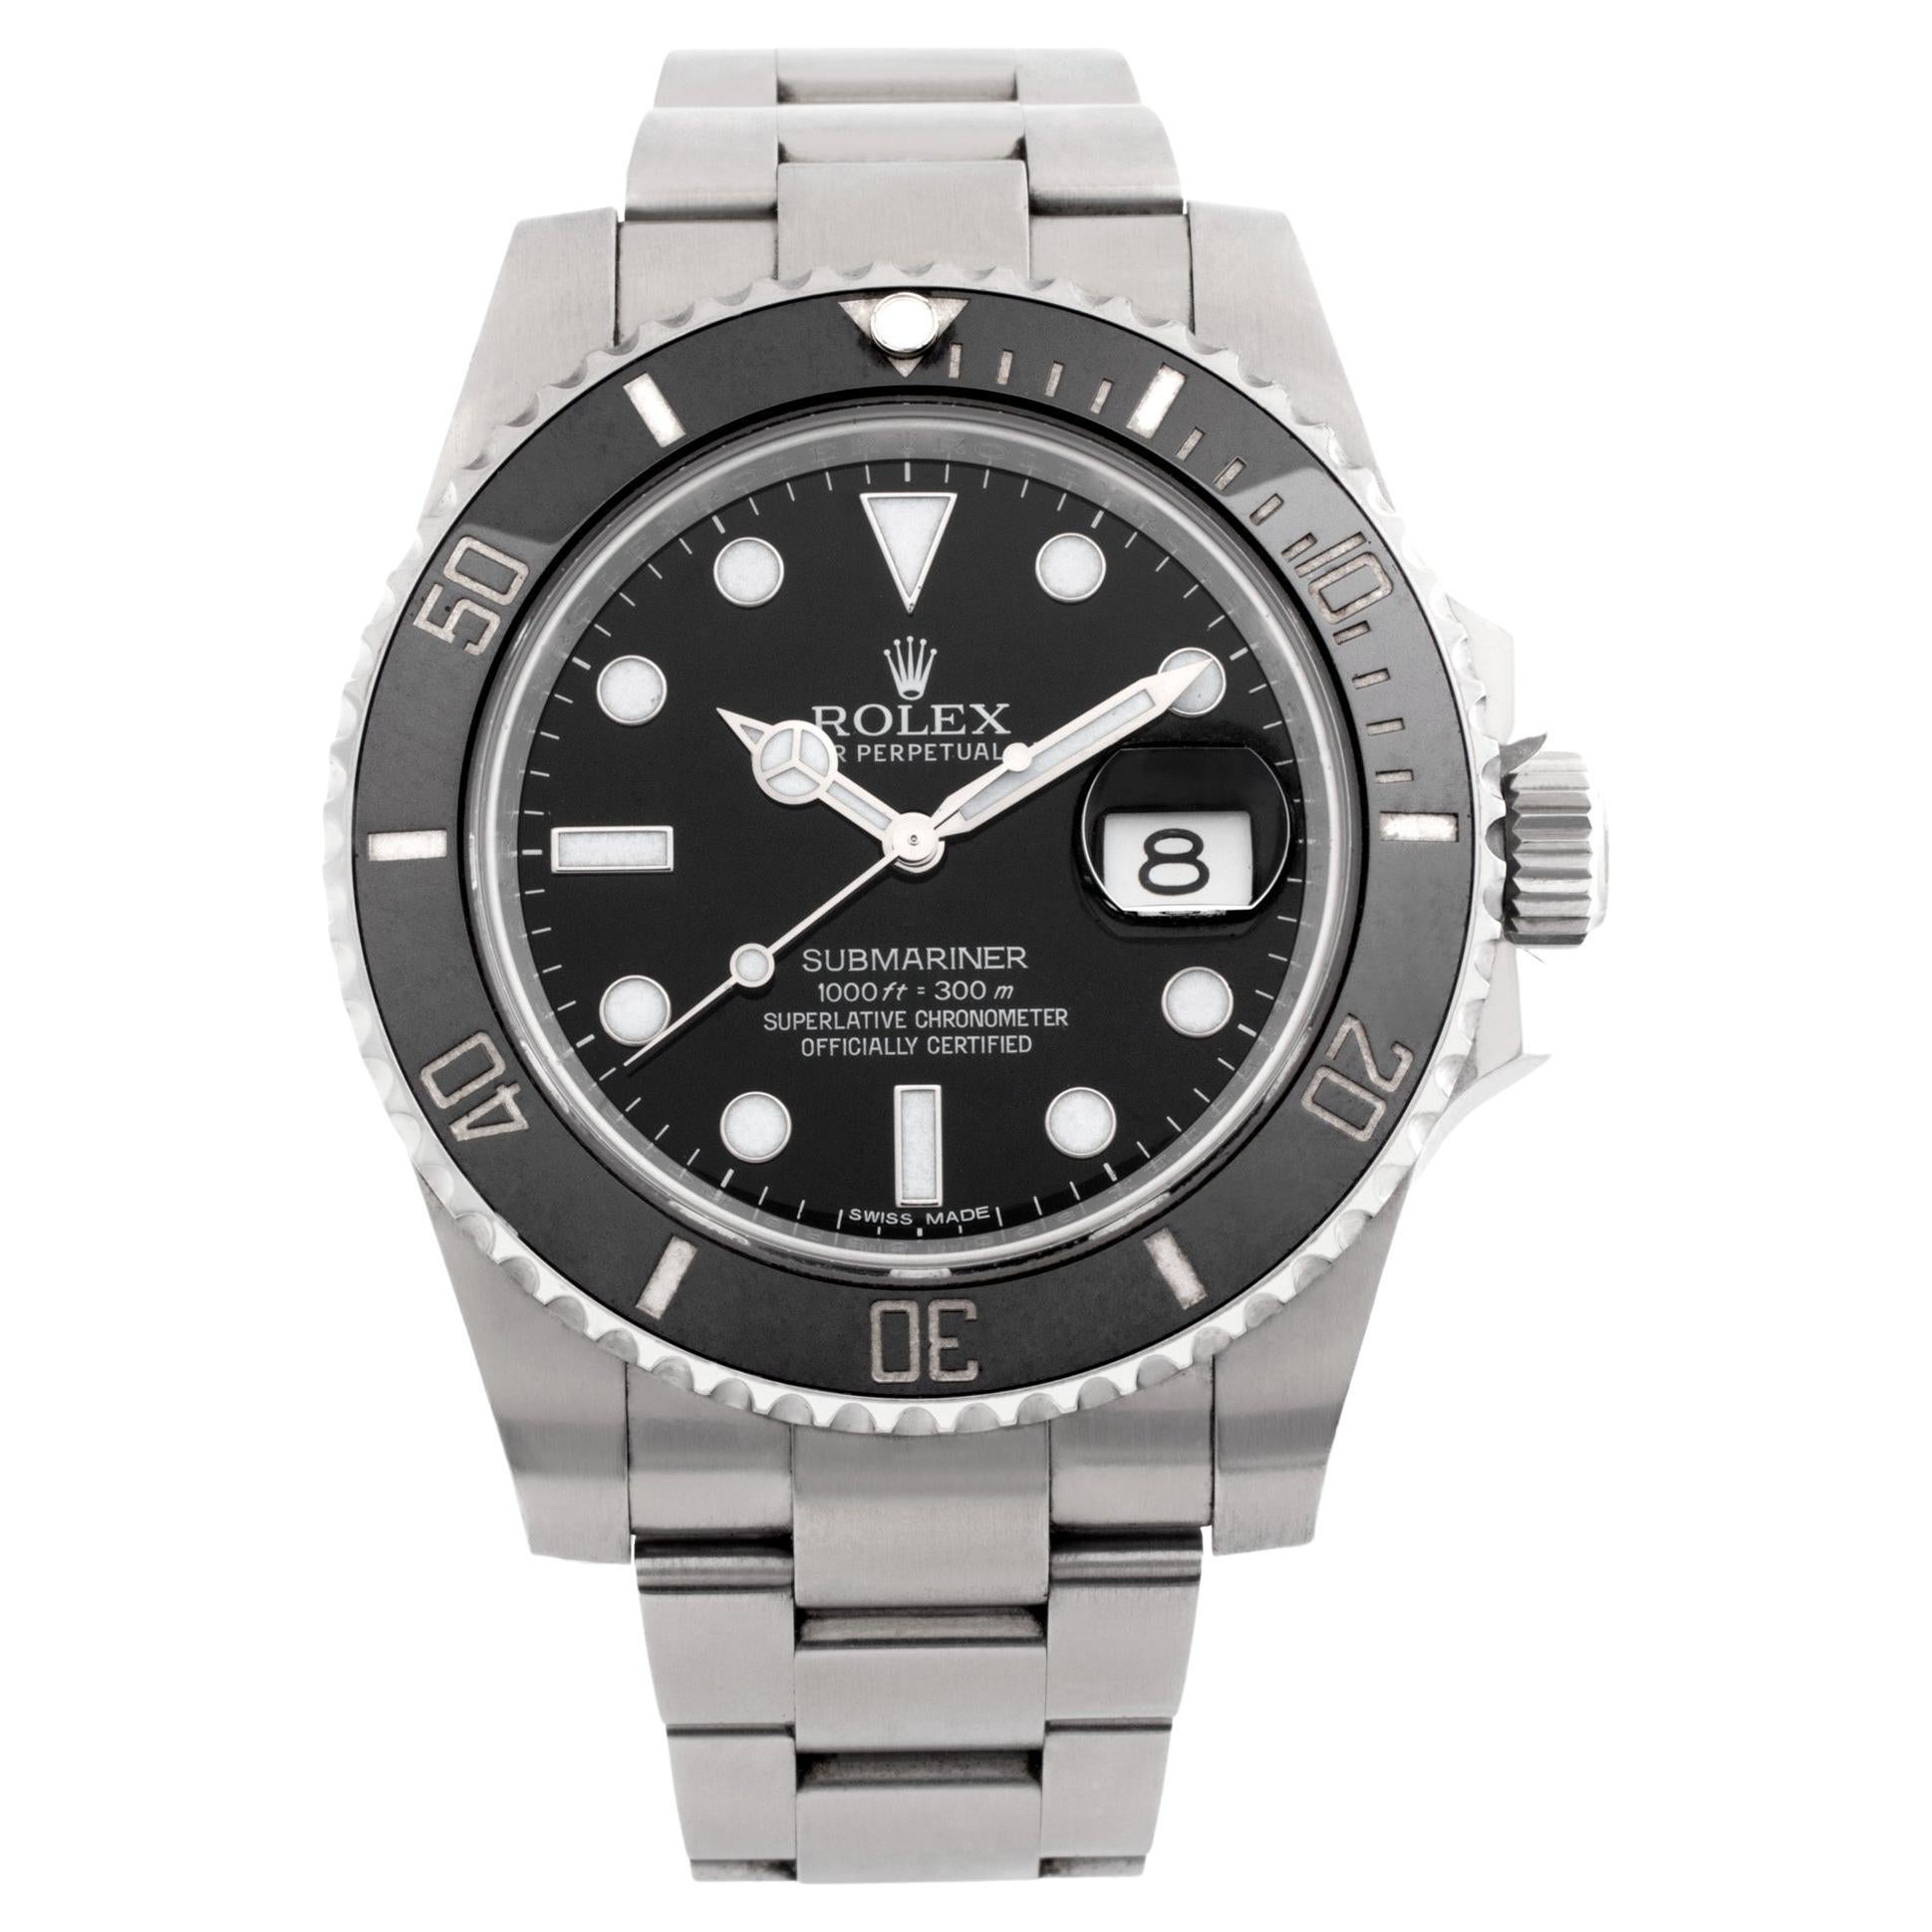 Rolex Submariner 116610ln Automatic Watch Stainless Steel Black Dial